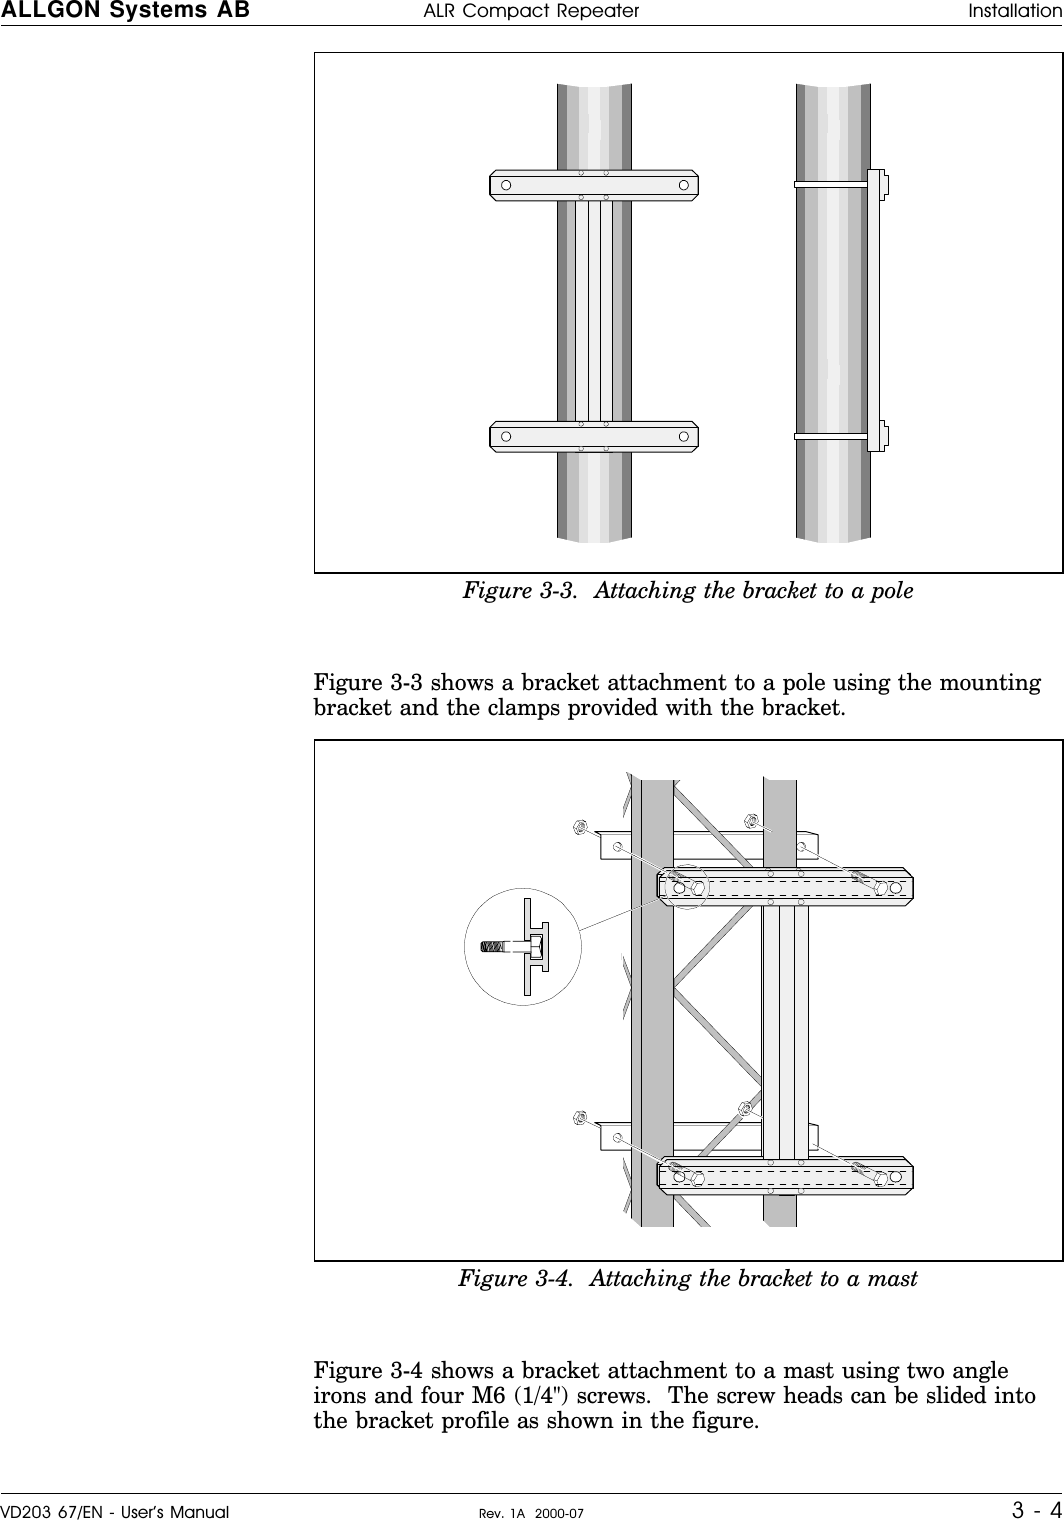    Figure 3-3 shows a bracket attachment to a pole using the mountingbracket and the clamps provided with the bracket.Figure 3-4 shows a bracket attachment to a mast using two angleirons and four M6 (1/4&quot;) screws.  The screw heads can be slided intothe bracket profile as shown in the figure.Figure 3-3.  Attaching the bracket to a poleFigure 3-4.  Attaching the bracket to a mastALLGON Systems AB ALR Compact Repeater InstallationVD203 67/EN - User’s Manual Rev. 1A  2000-07 3 - 4